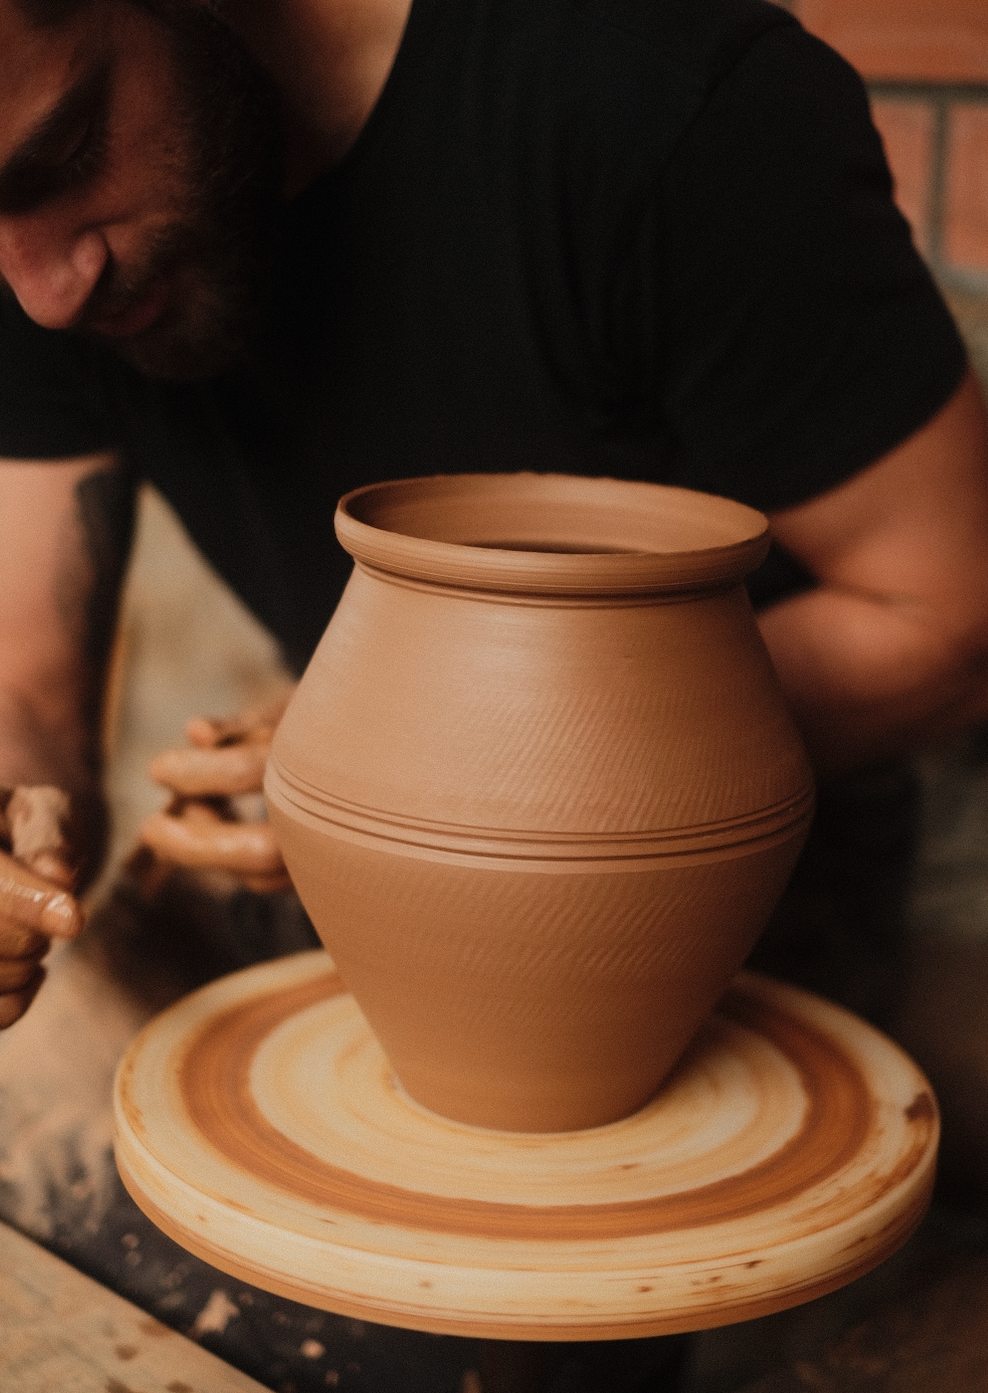 Ceramic Workshop "Learn Traditional Pottery of Buño" with Pablo in A Coruña, Galicia, Spain by subcultours